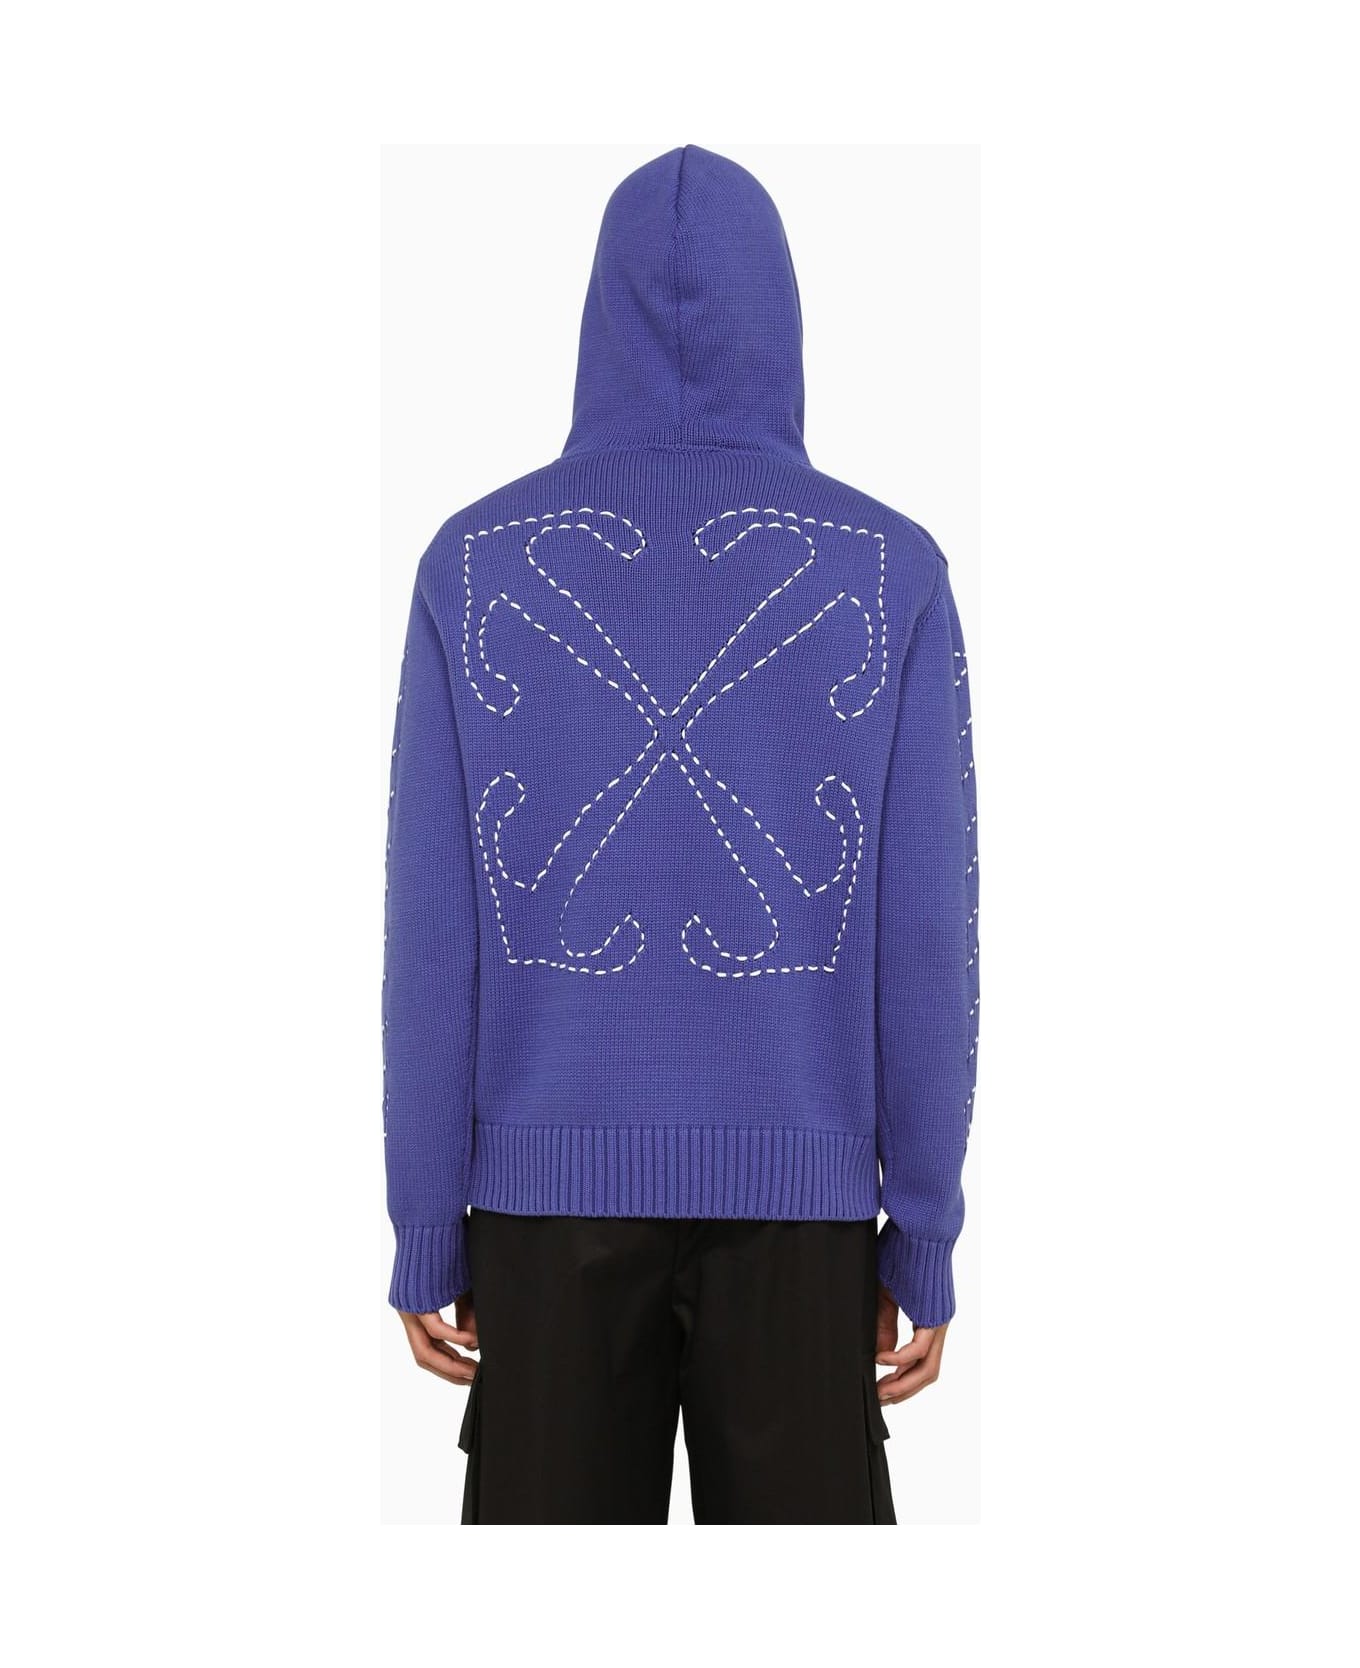 Off-White Arrows Blue Knitted Hoodie - Blue